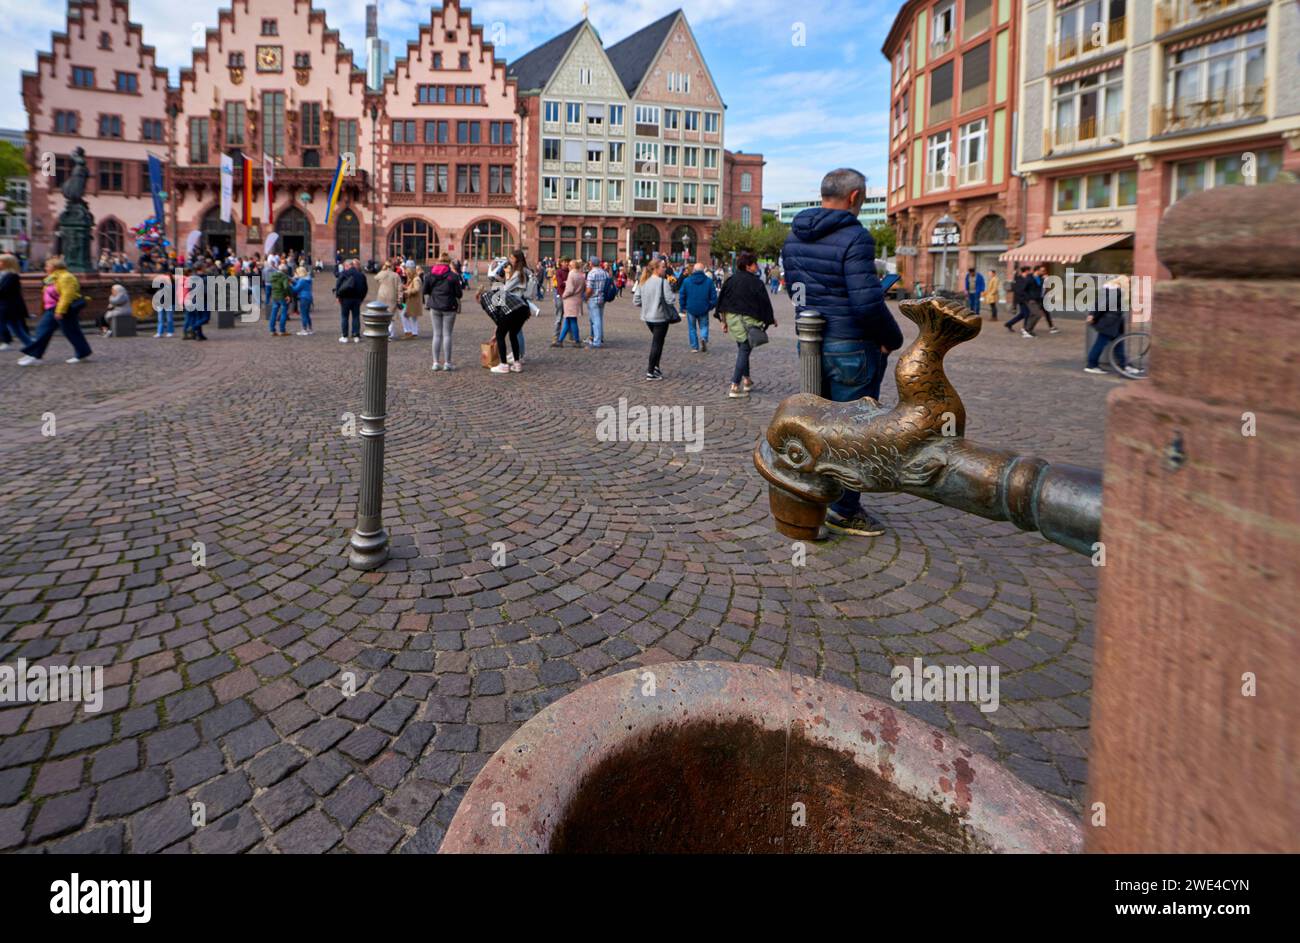 View on the Town Square Romerberg in Frankfurt, Germany Stock Photo